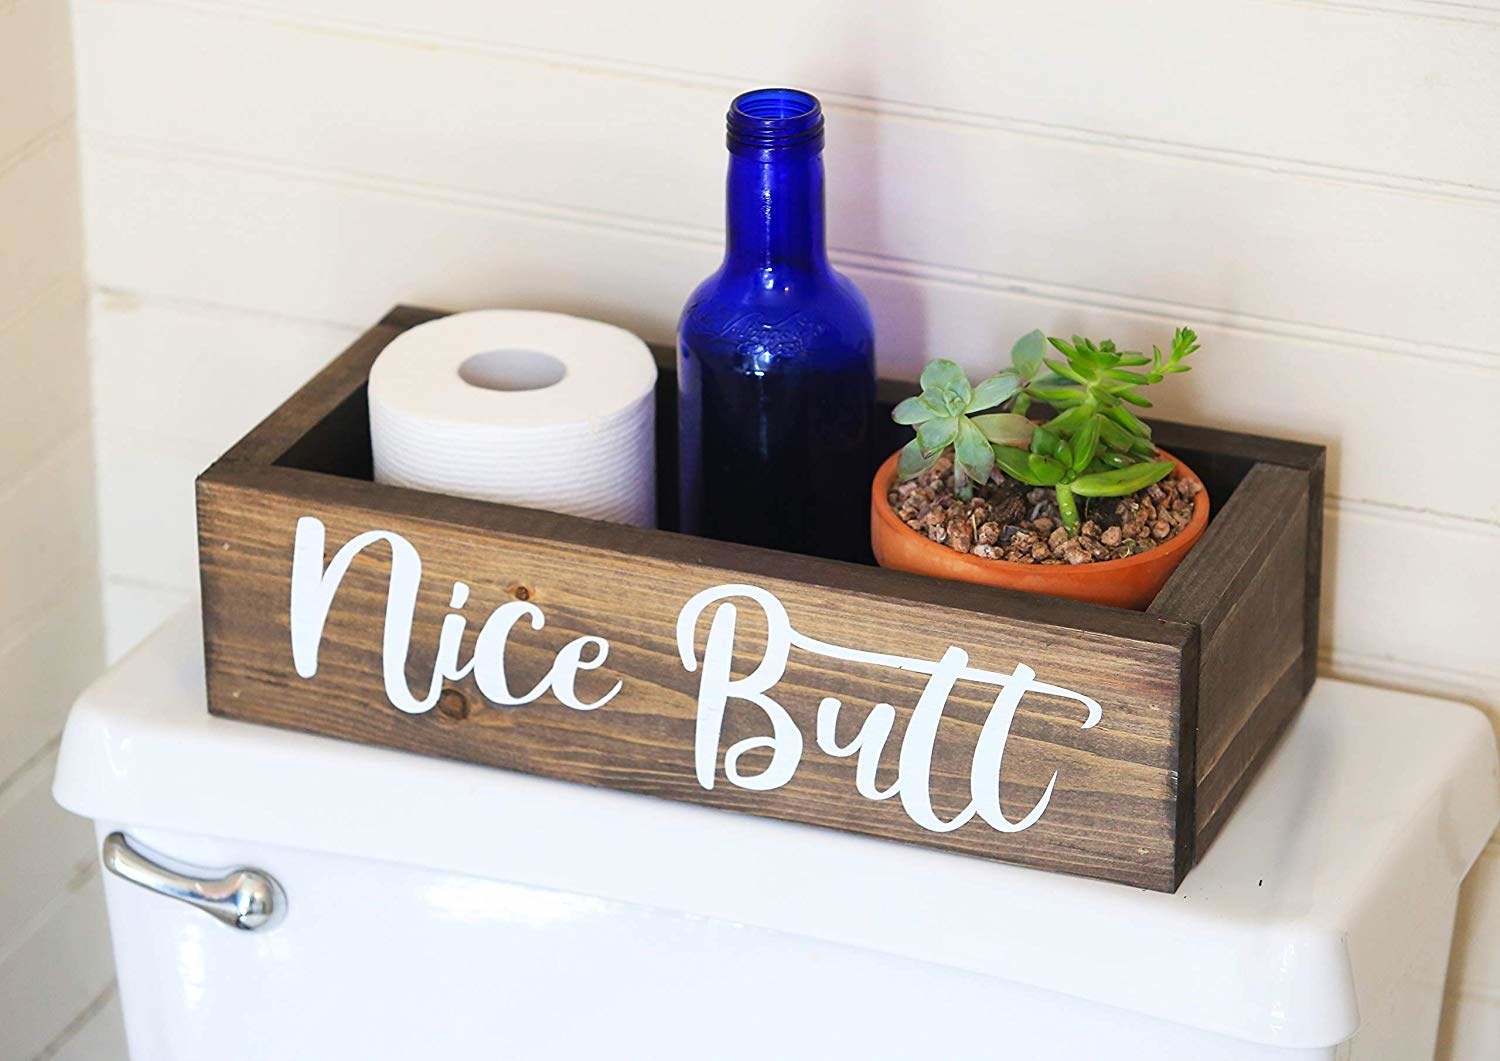 Rectangular wood box on toilet tank holding roll of toilet paper, plant, and bottle with the words &quot;nice butt&quot; painted on the front 